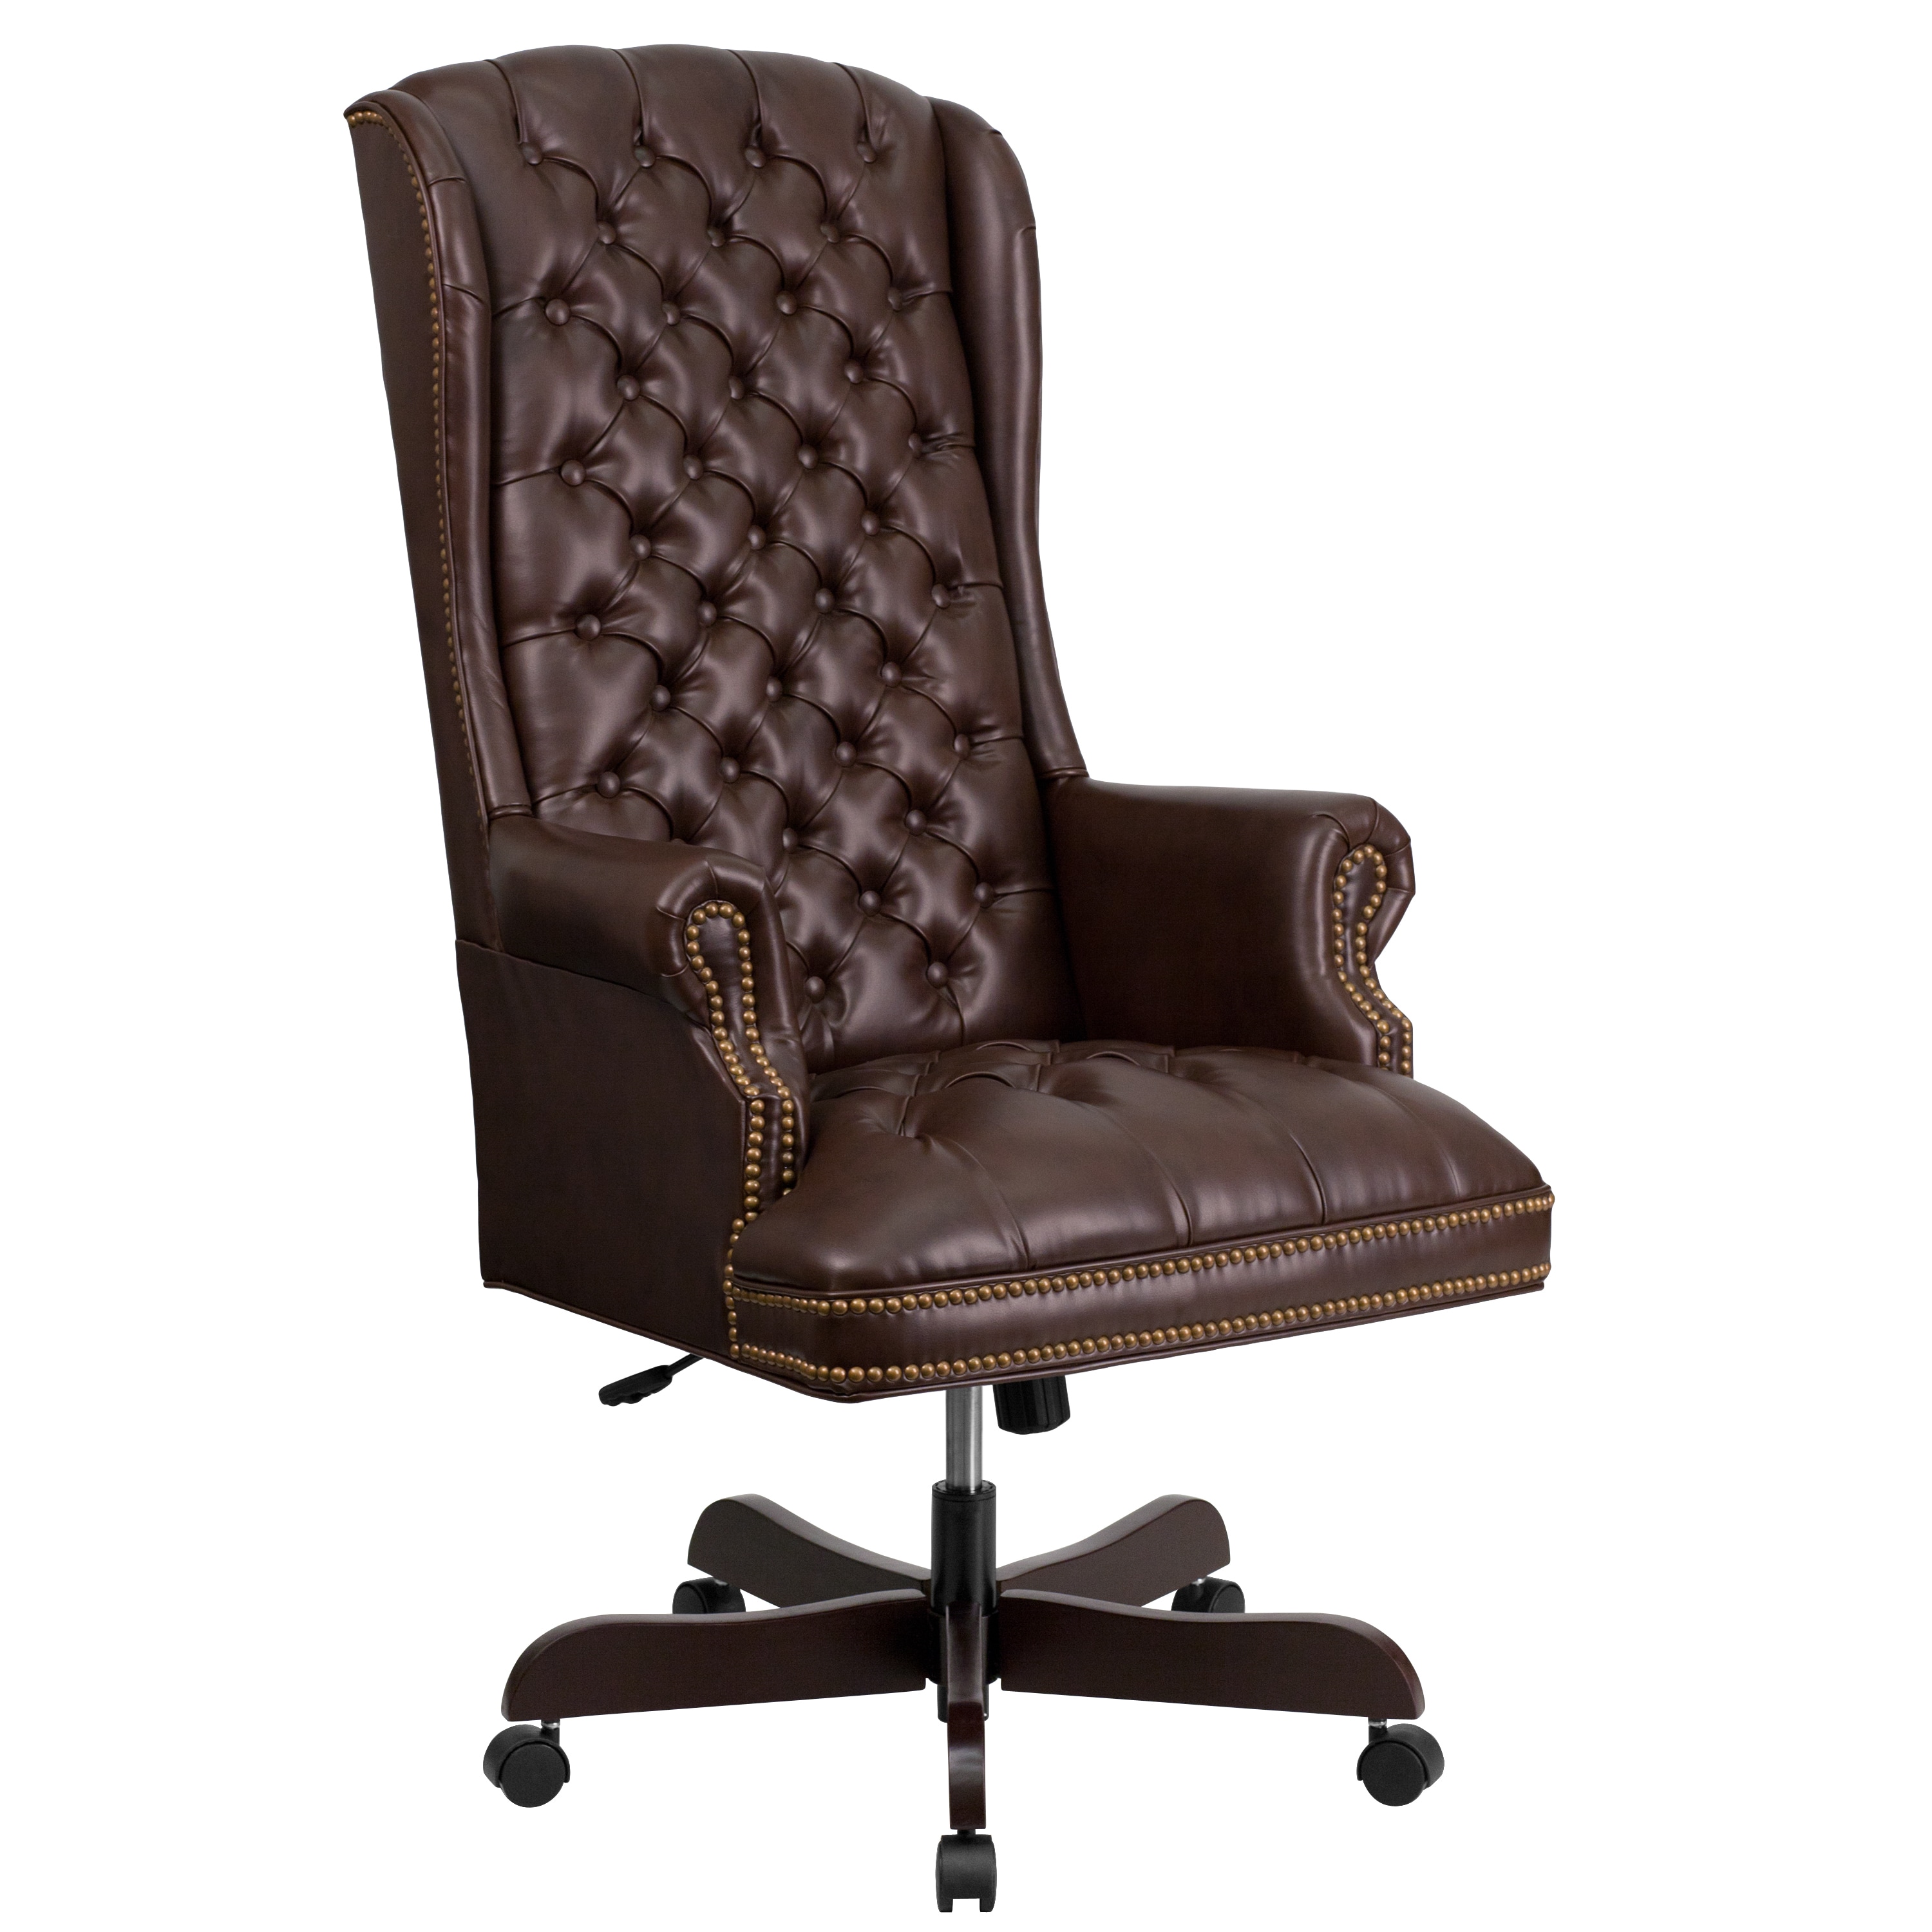 High-back-Traditional-Tufted-Leather-Executive-Office-Chair-68dd06f3-20d3-4643-926d-04b1237ad078.jpg